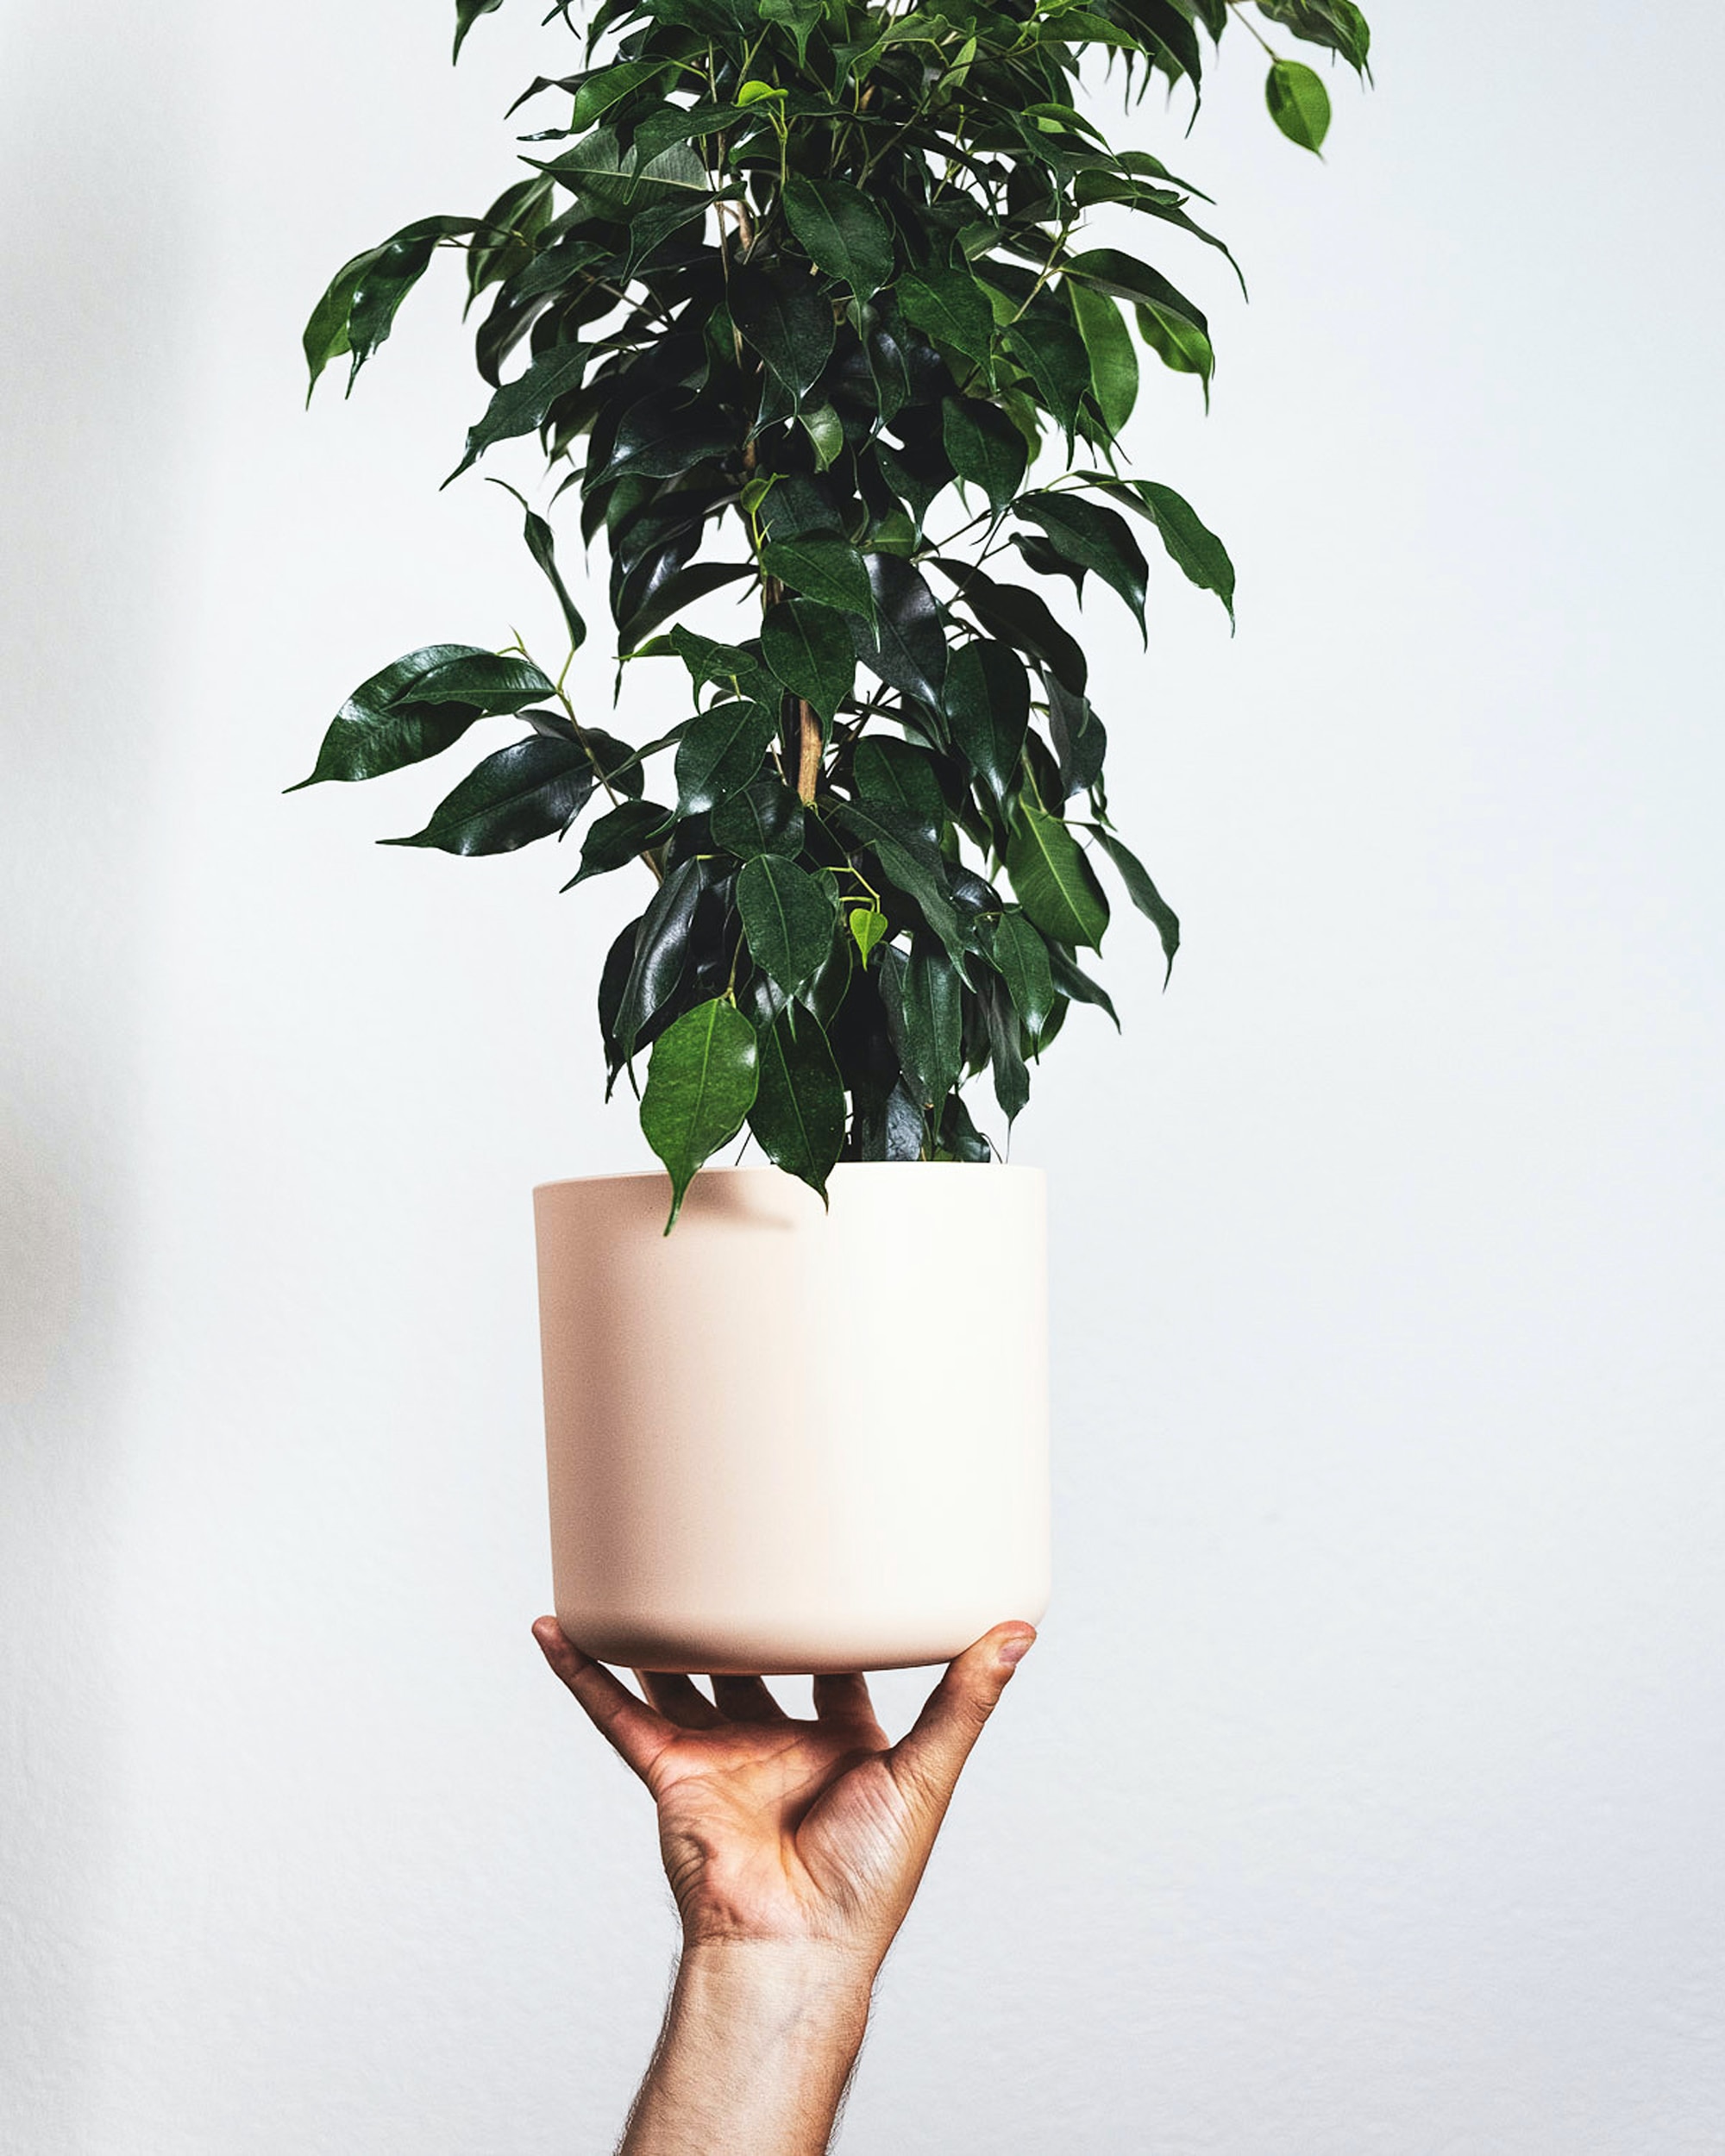 An image of a small Ficus benjamina in a pot being held by a hand.